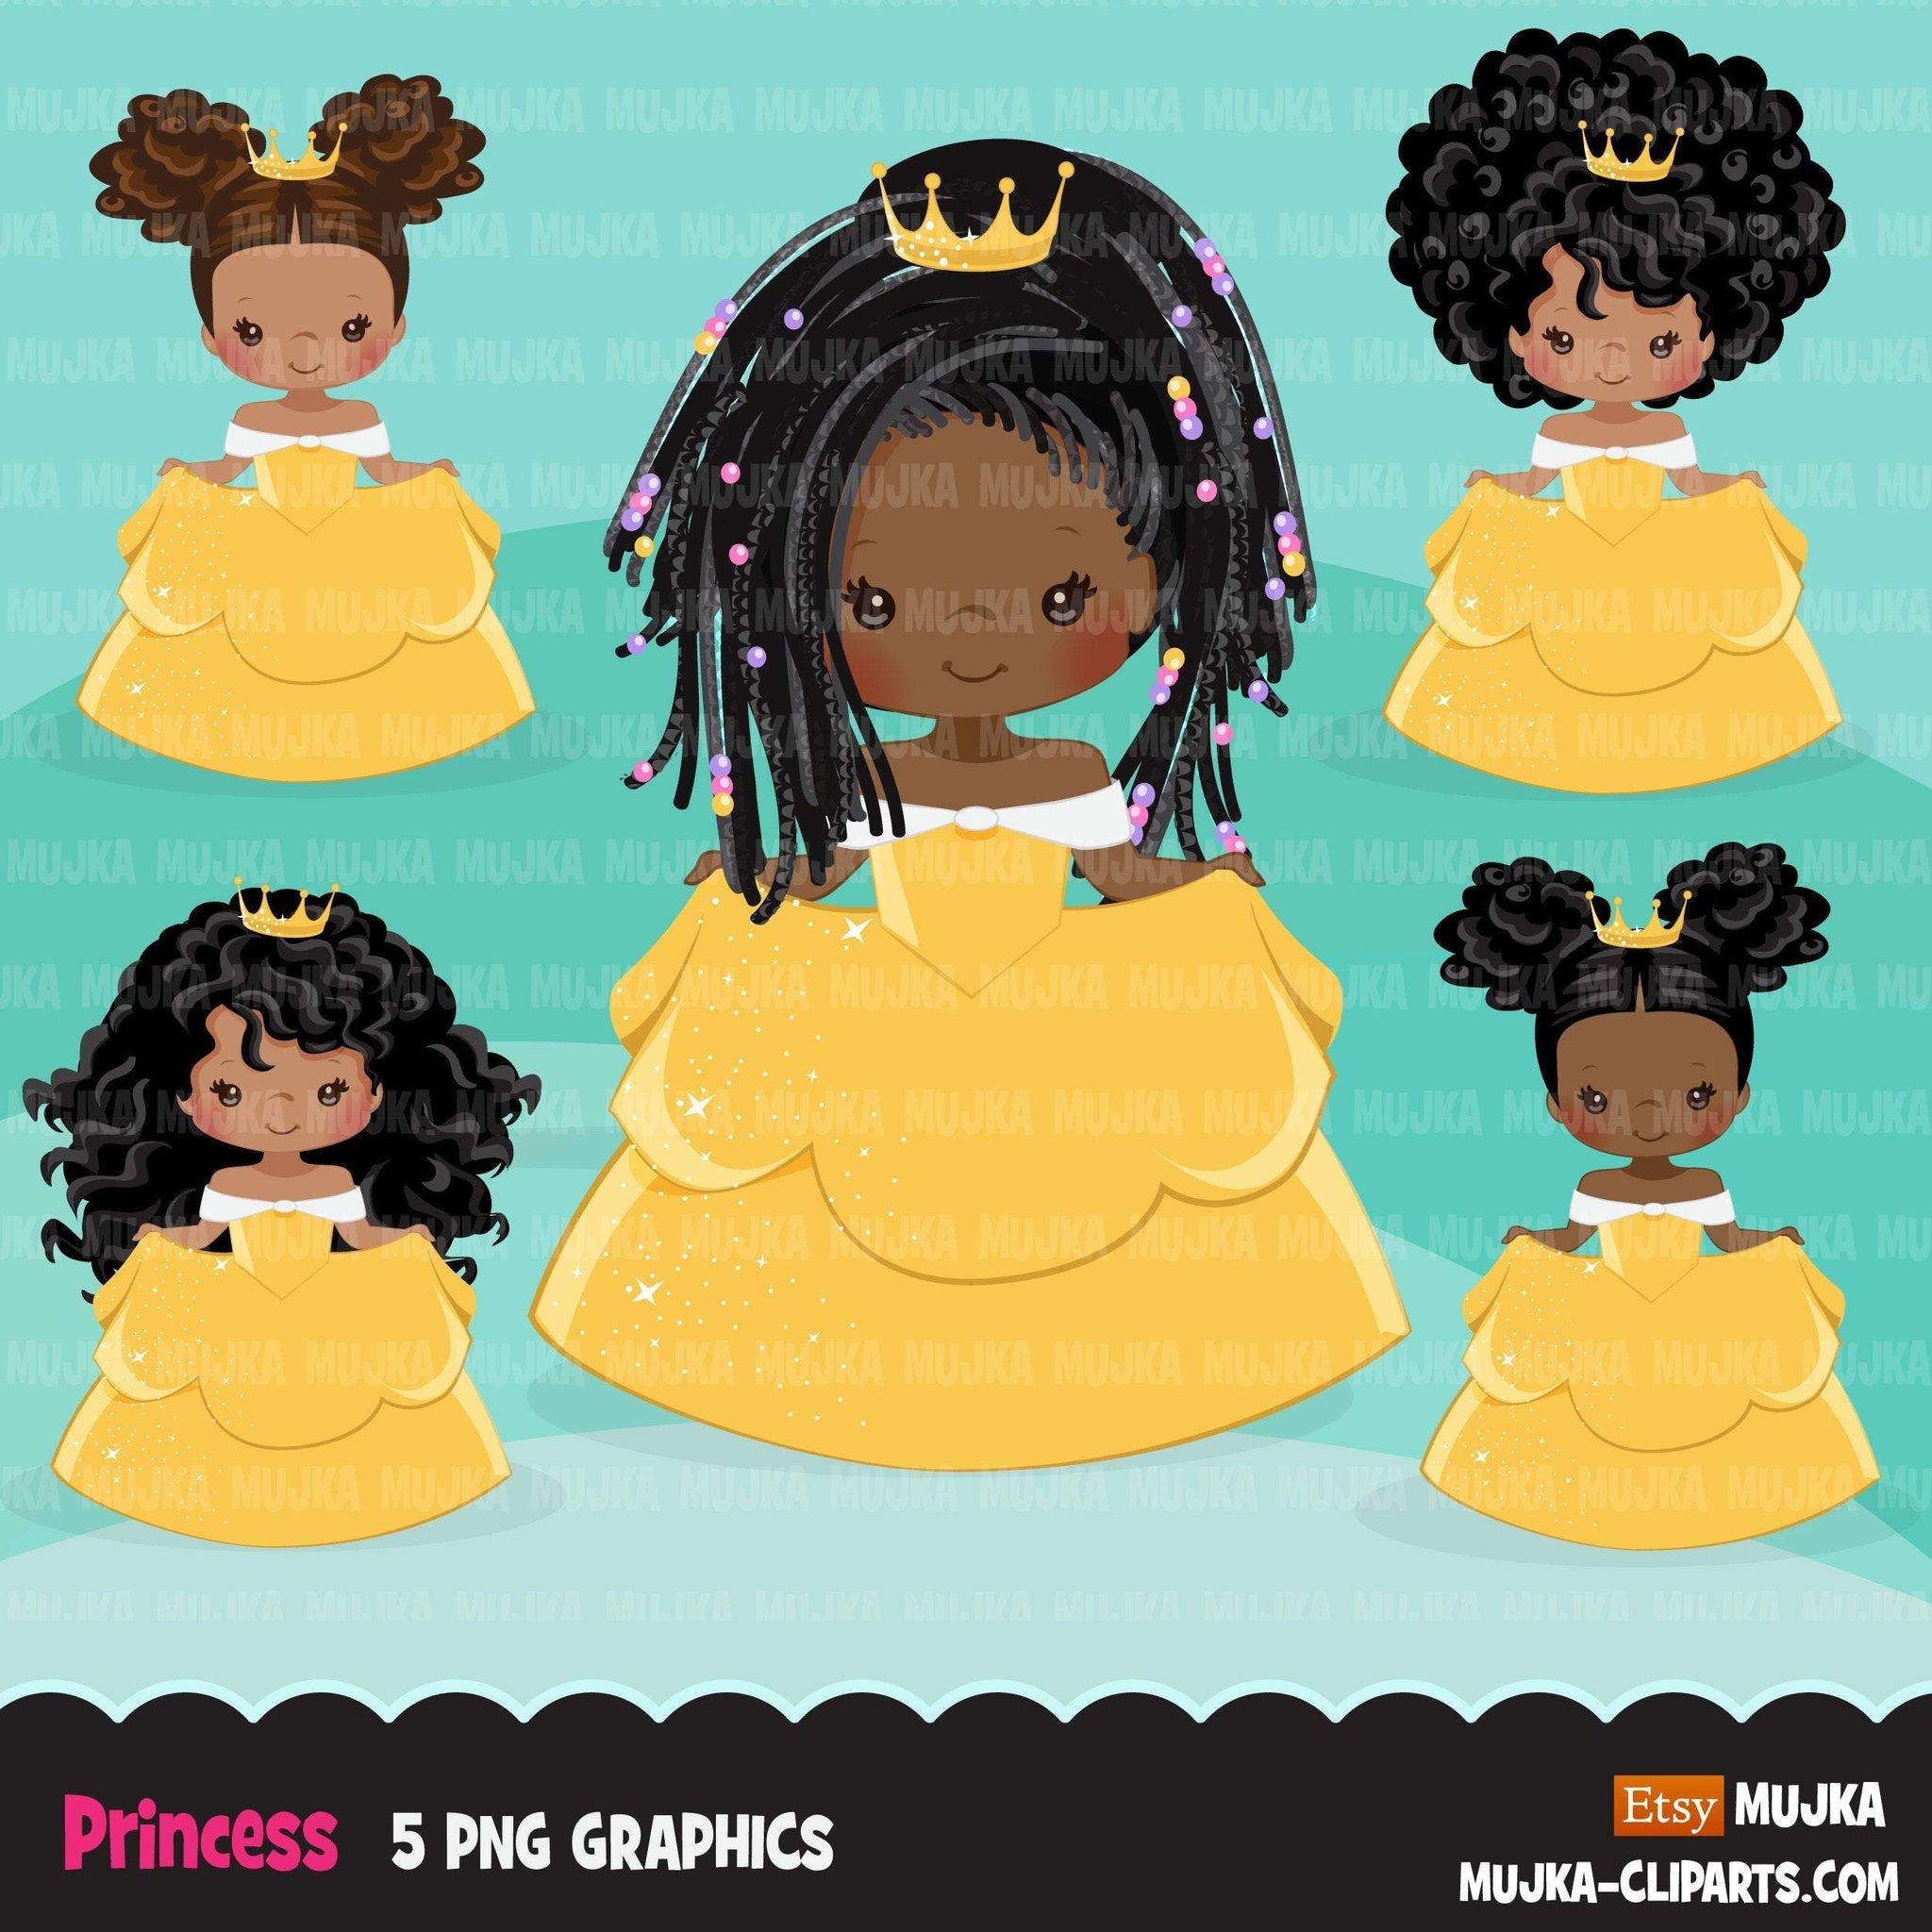 Black Princess clipart, fairy tale graphics, girls story book, yellow princess dress, commercial use clip art